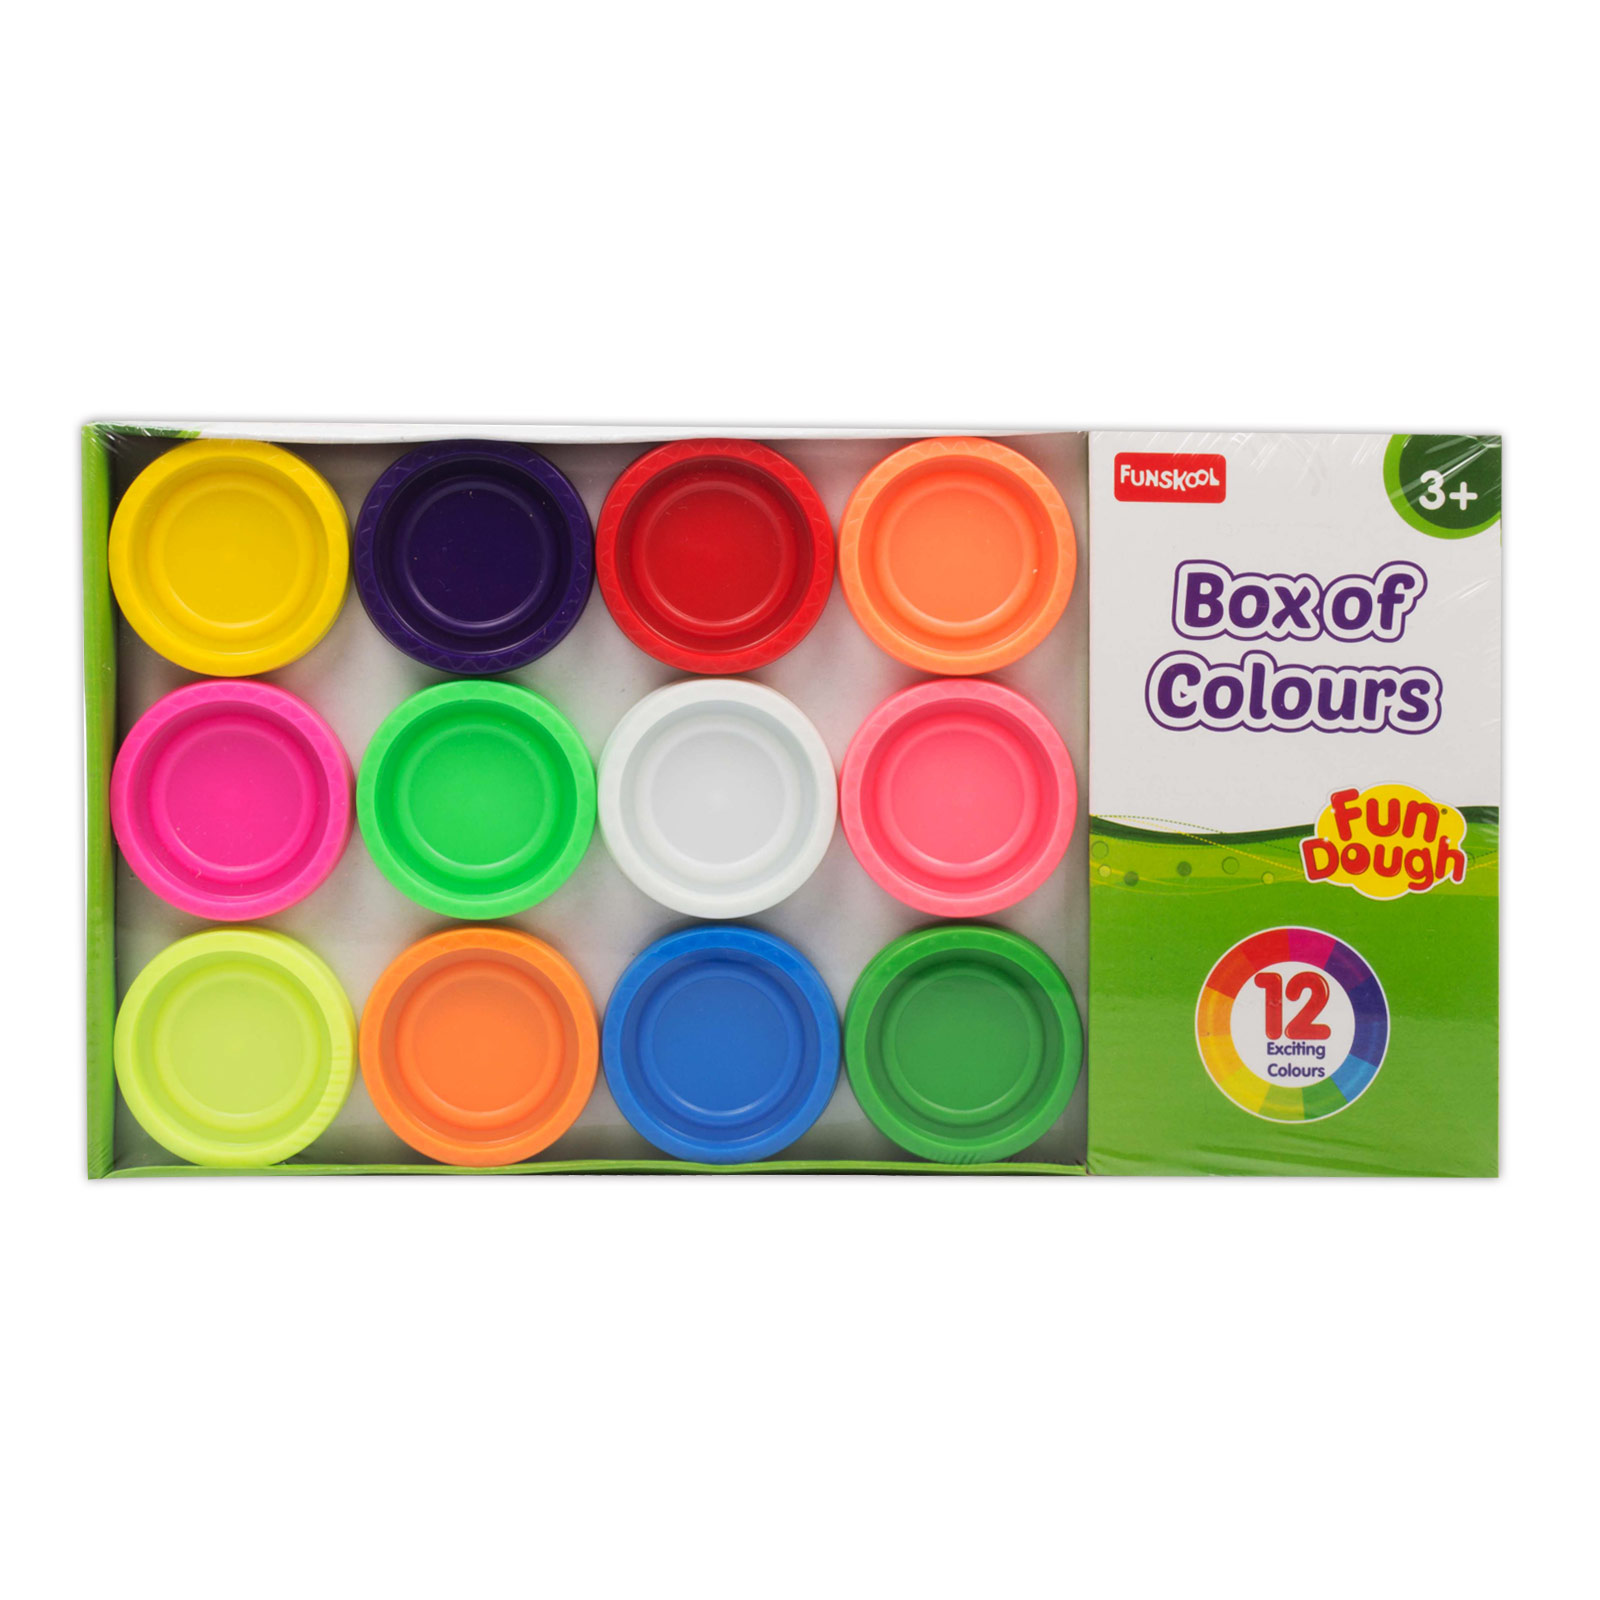 Funskool Rainbow Colours Play-Doh in Asansol at best price by Ratna & Co -  Justdial